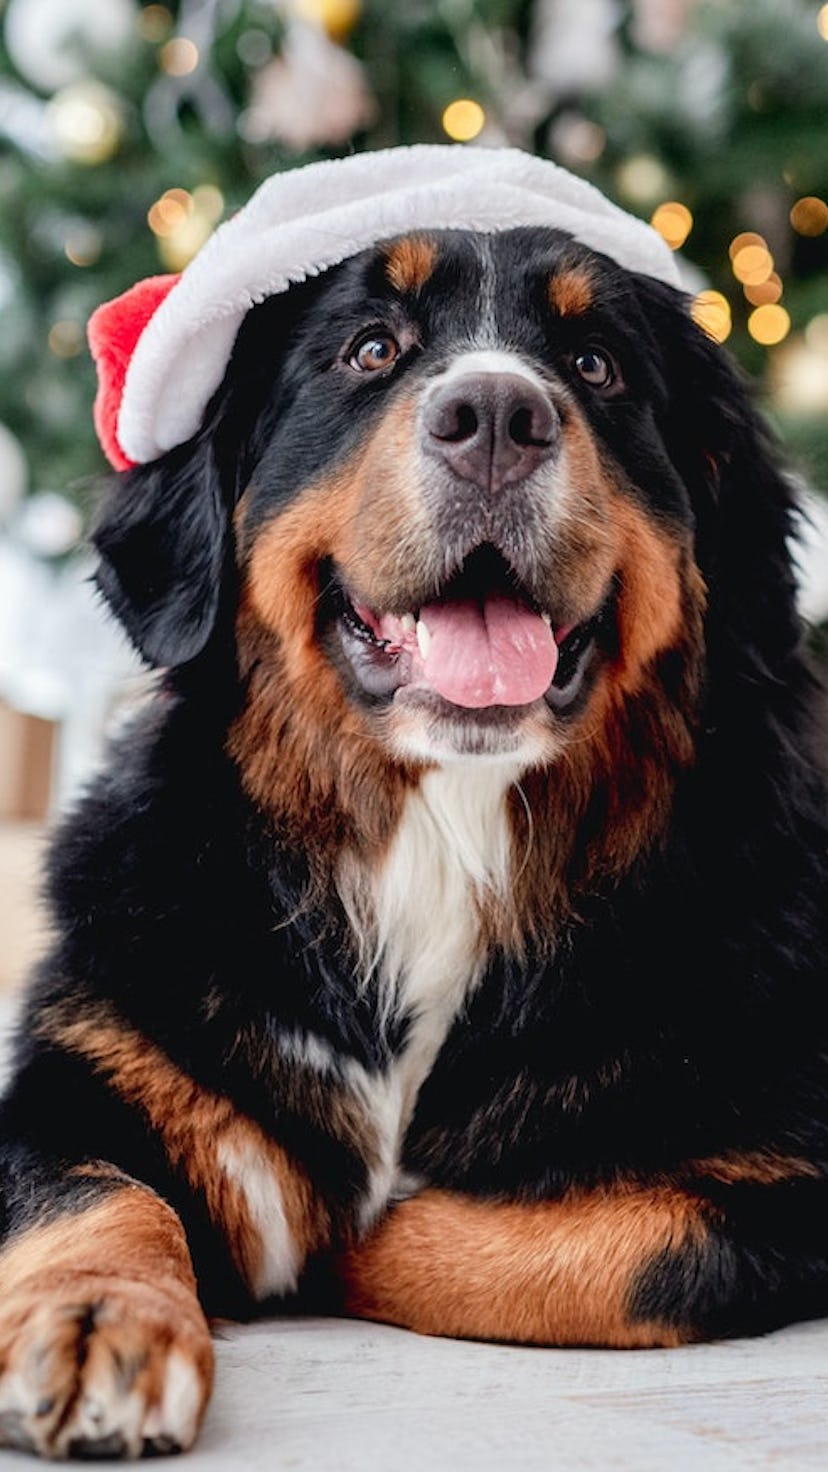 Check out these dog Advent calendars for 2022 filled with treats.